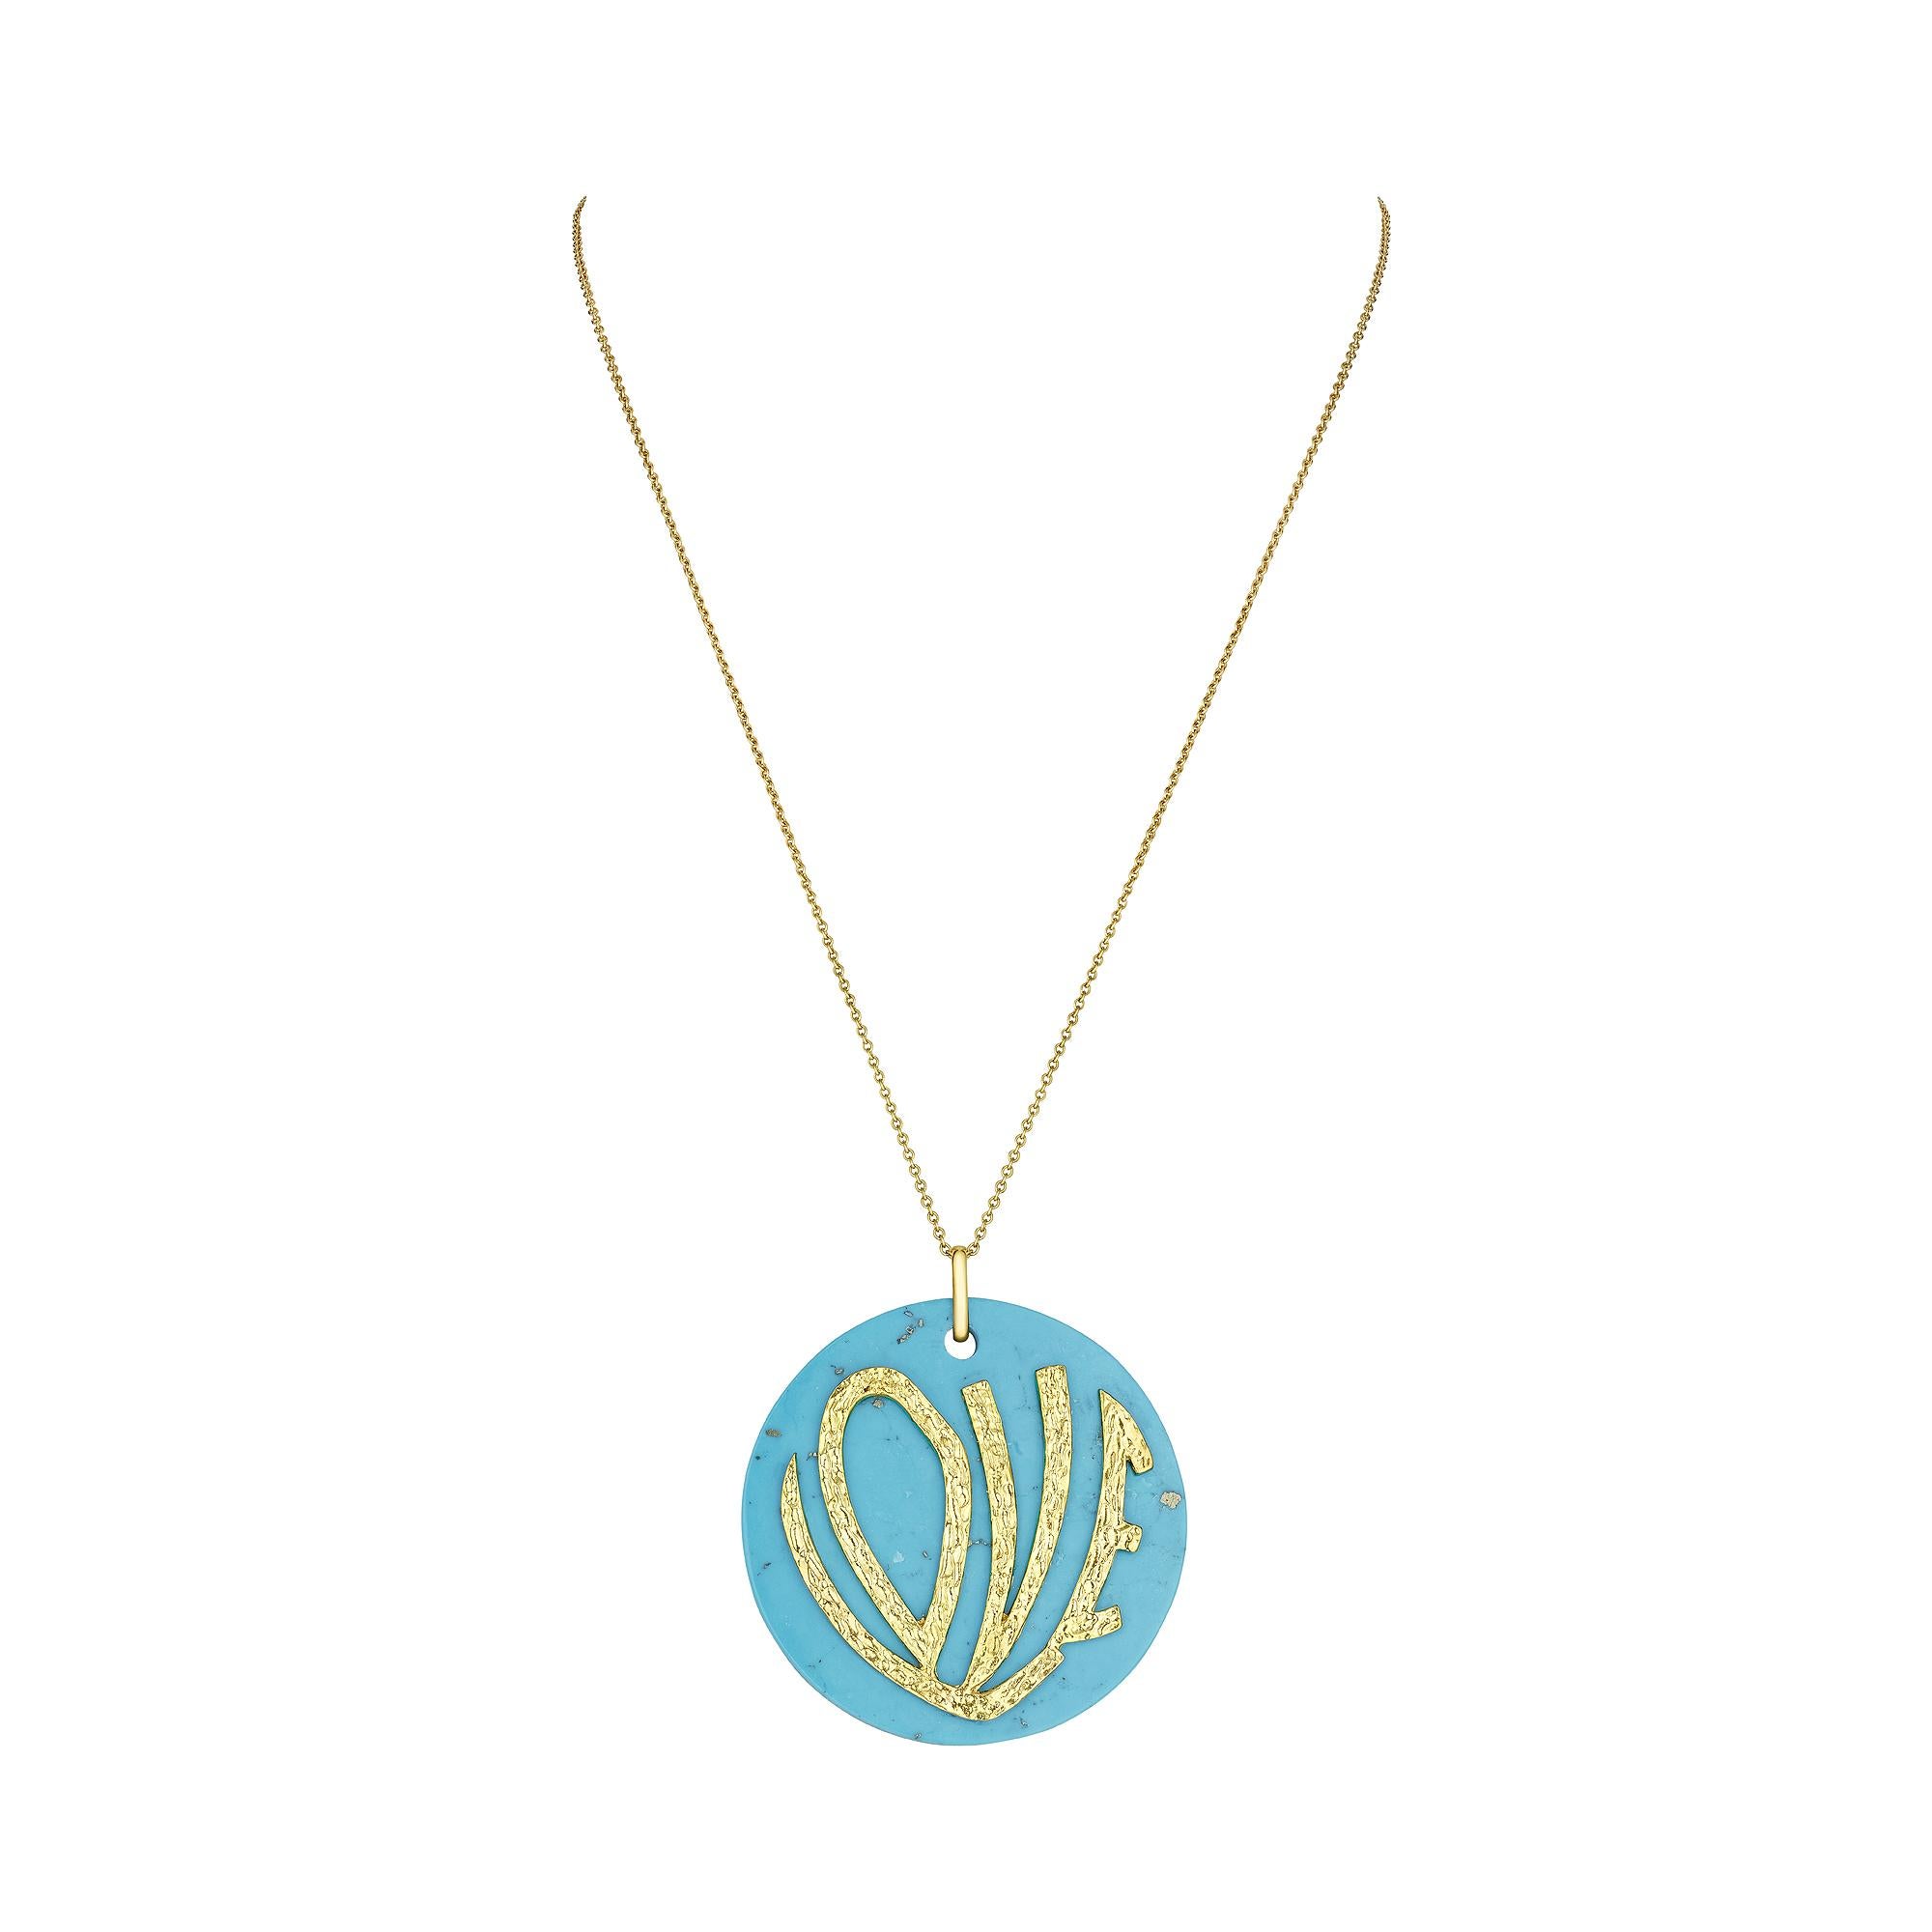 Show your love in full sight with this 1970's inspired large turquoise love pendant necklace.  This bold and colorful turquoise disc, with the hammered 18 karat yellow gold word LOVE stylishly applied to the front, makes this necklace a powerful and